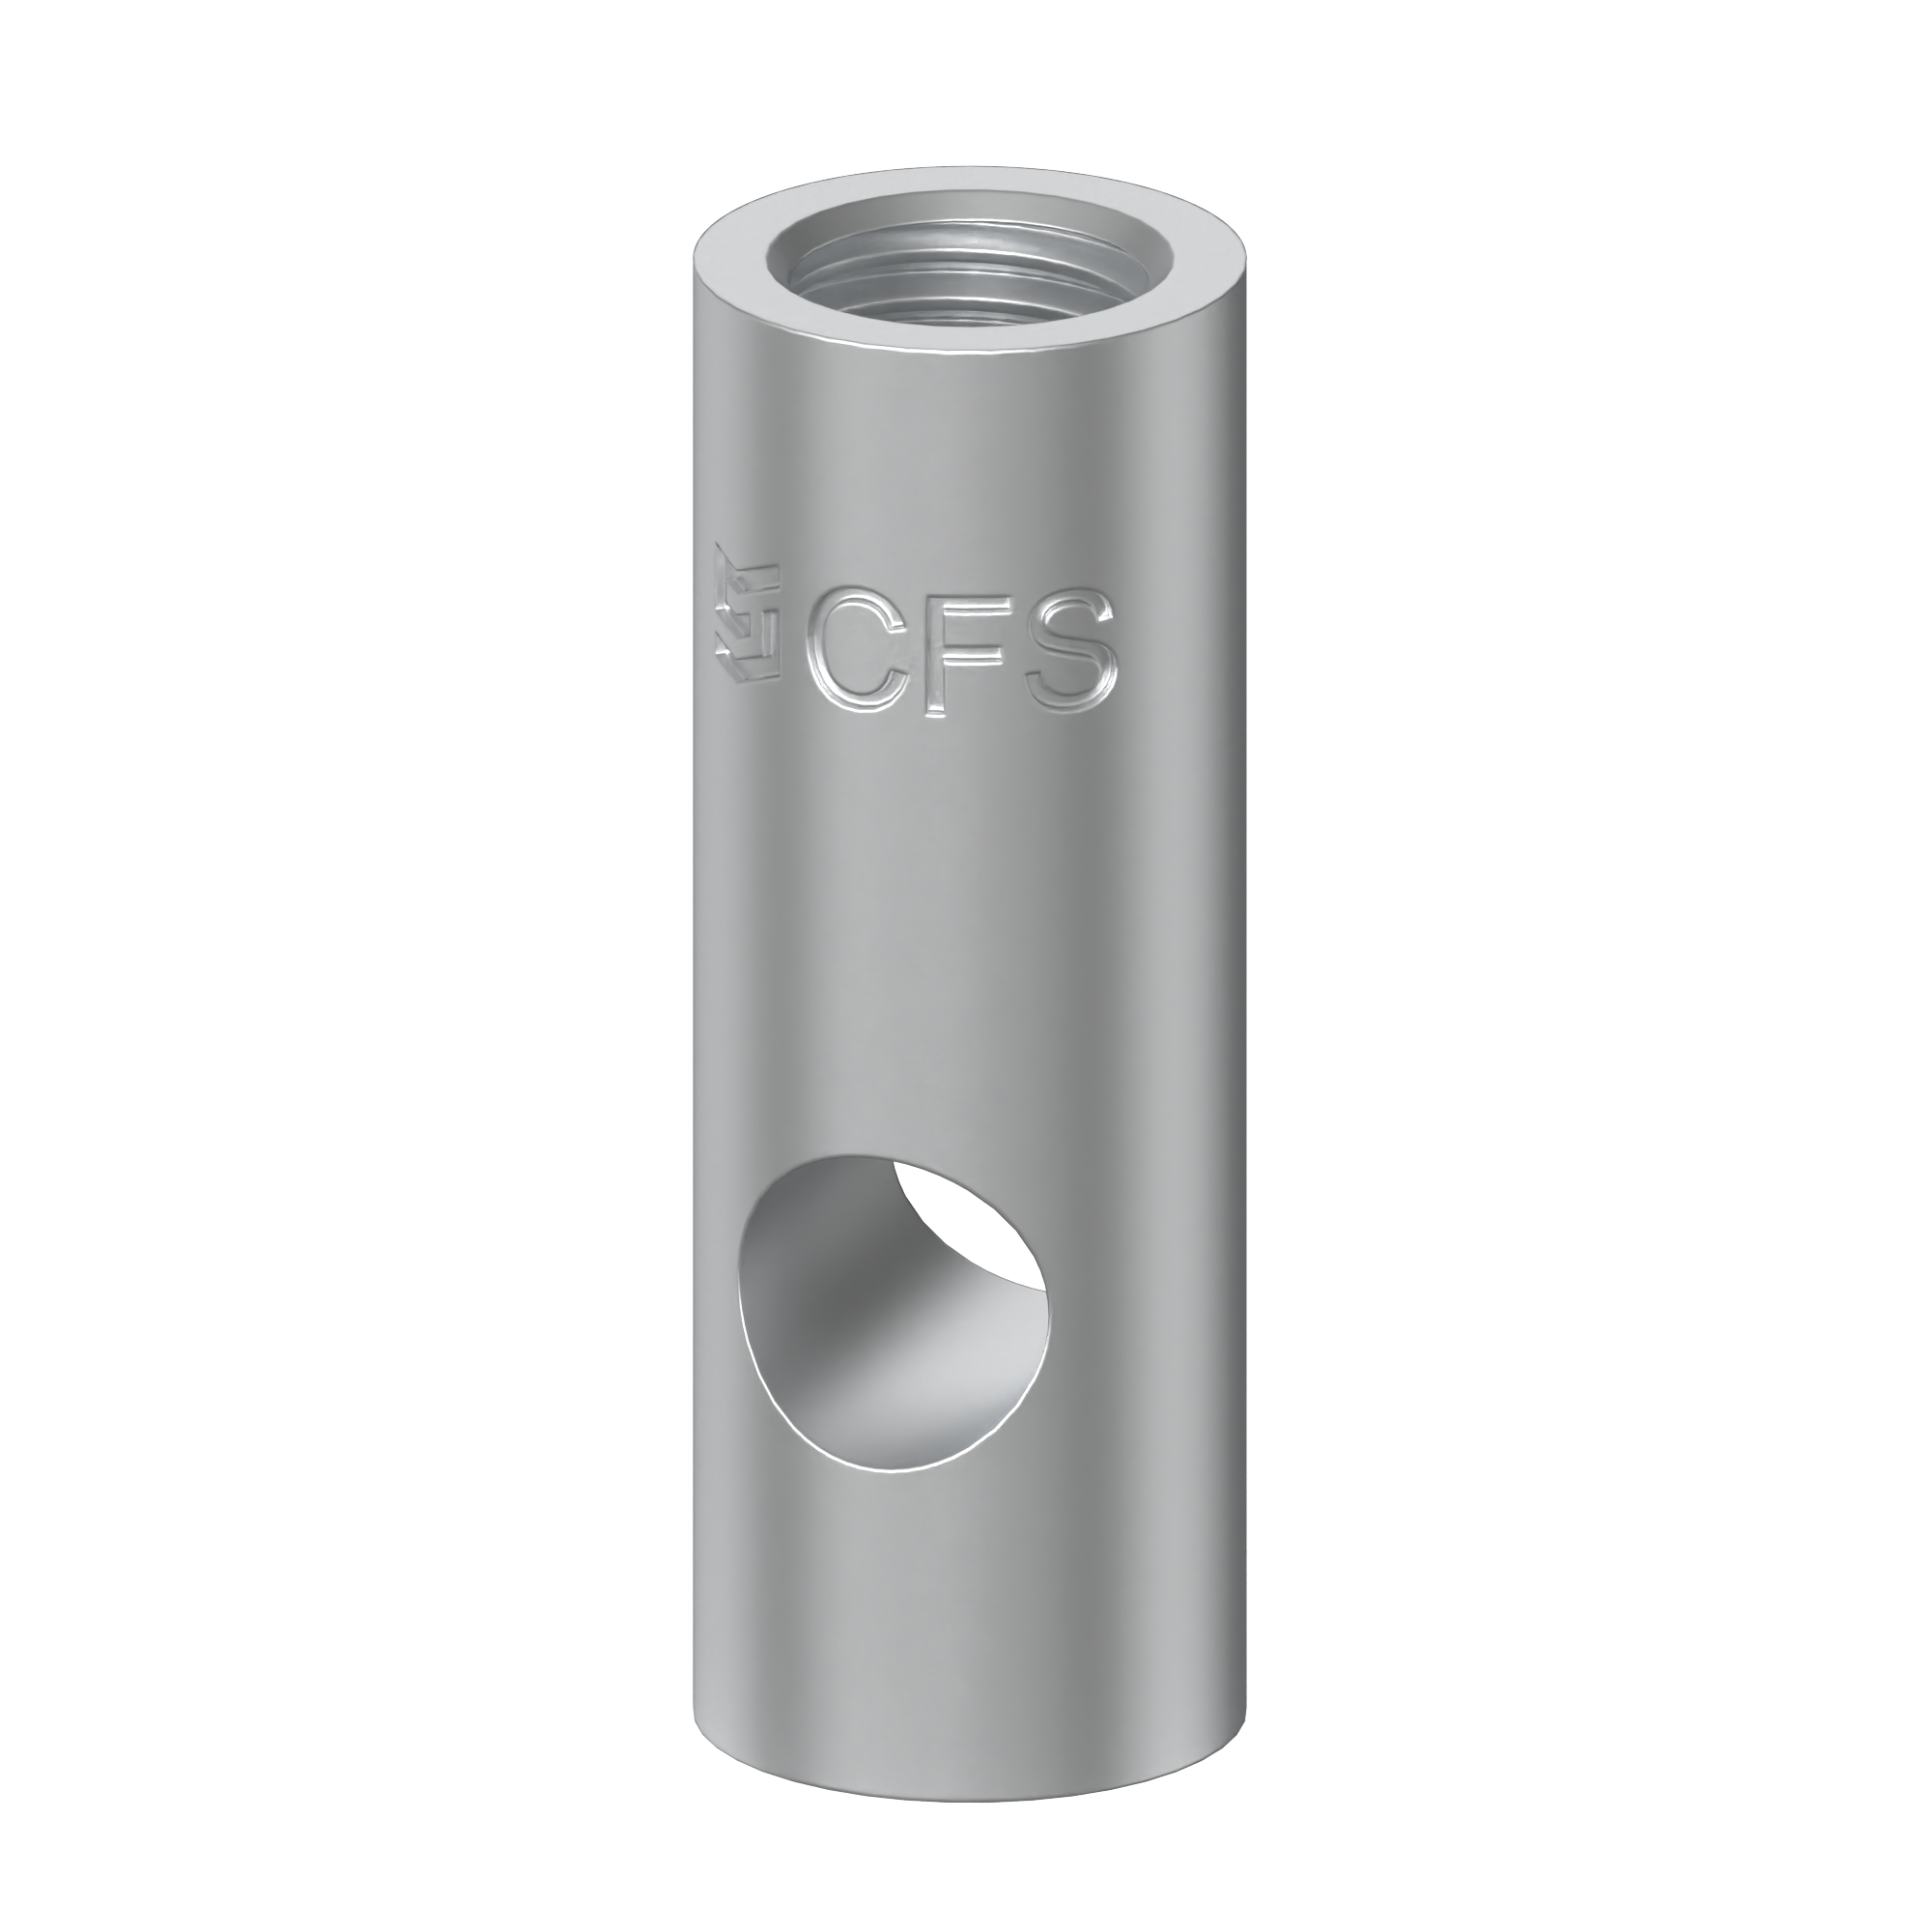 Solid cross hole socket in 3D render with CFS logo